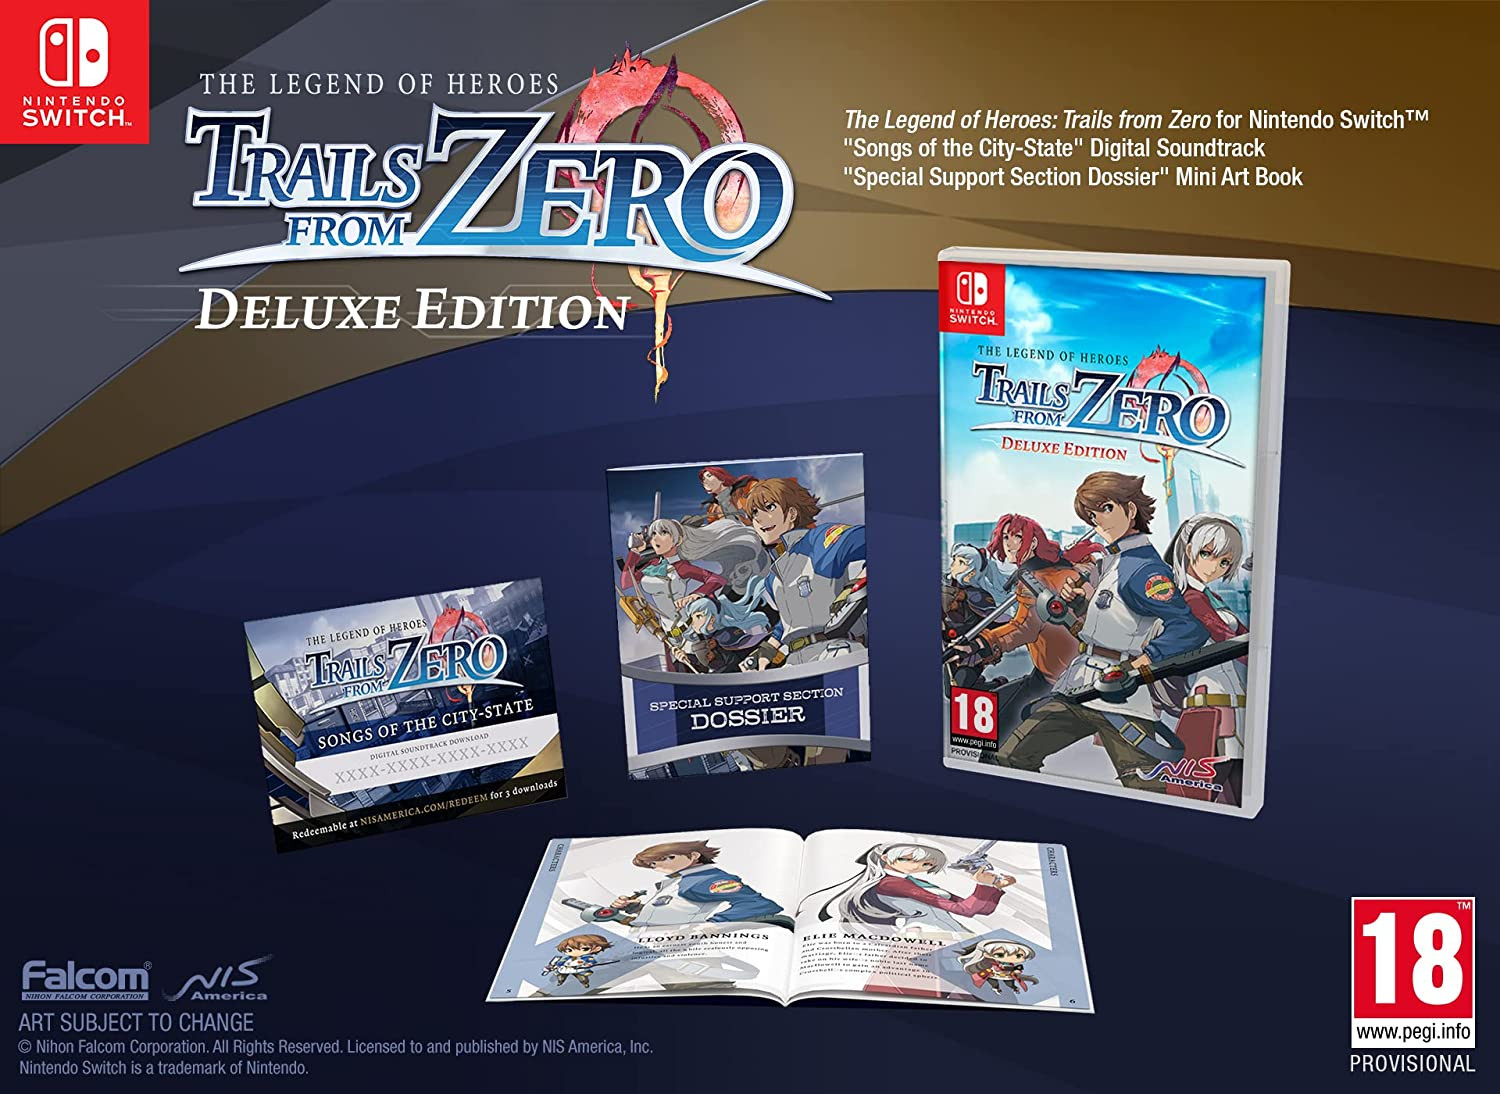 The Legend of Heroes Trails from Zero Deluxe Edition - Nintendo Switch